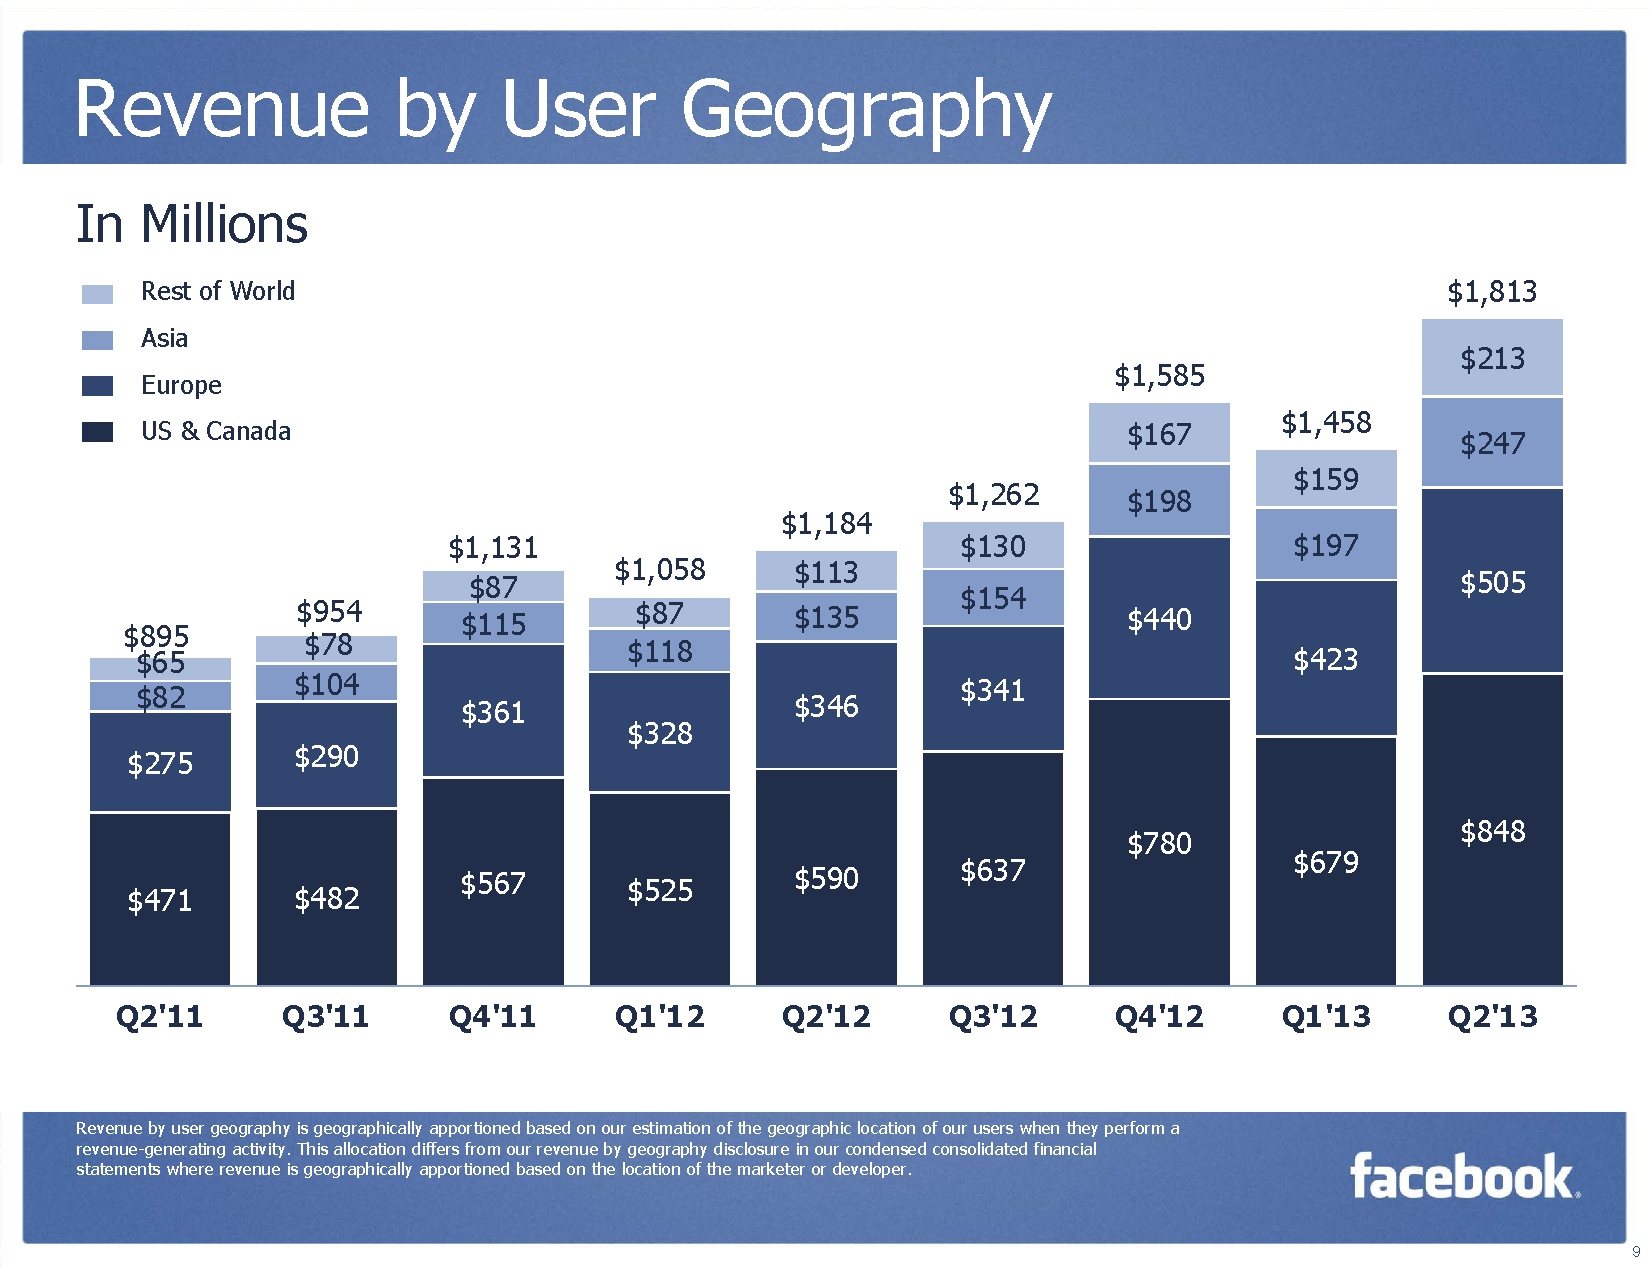 Revenue by User Geography (Quelle Facebook)